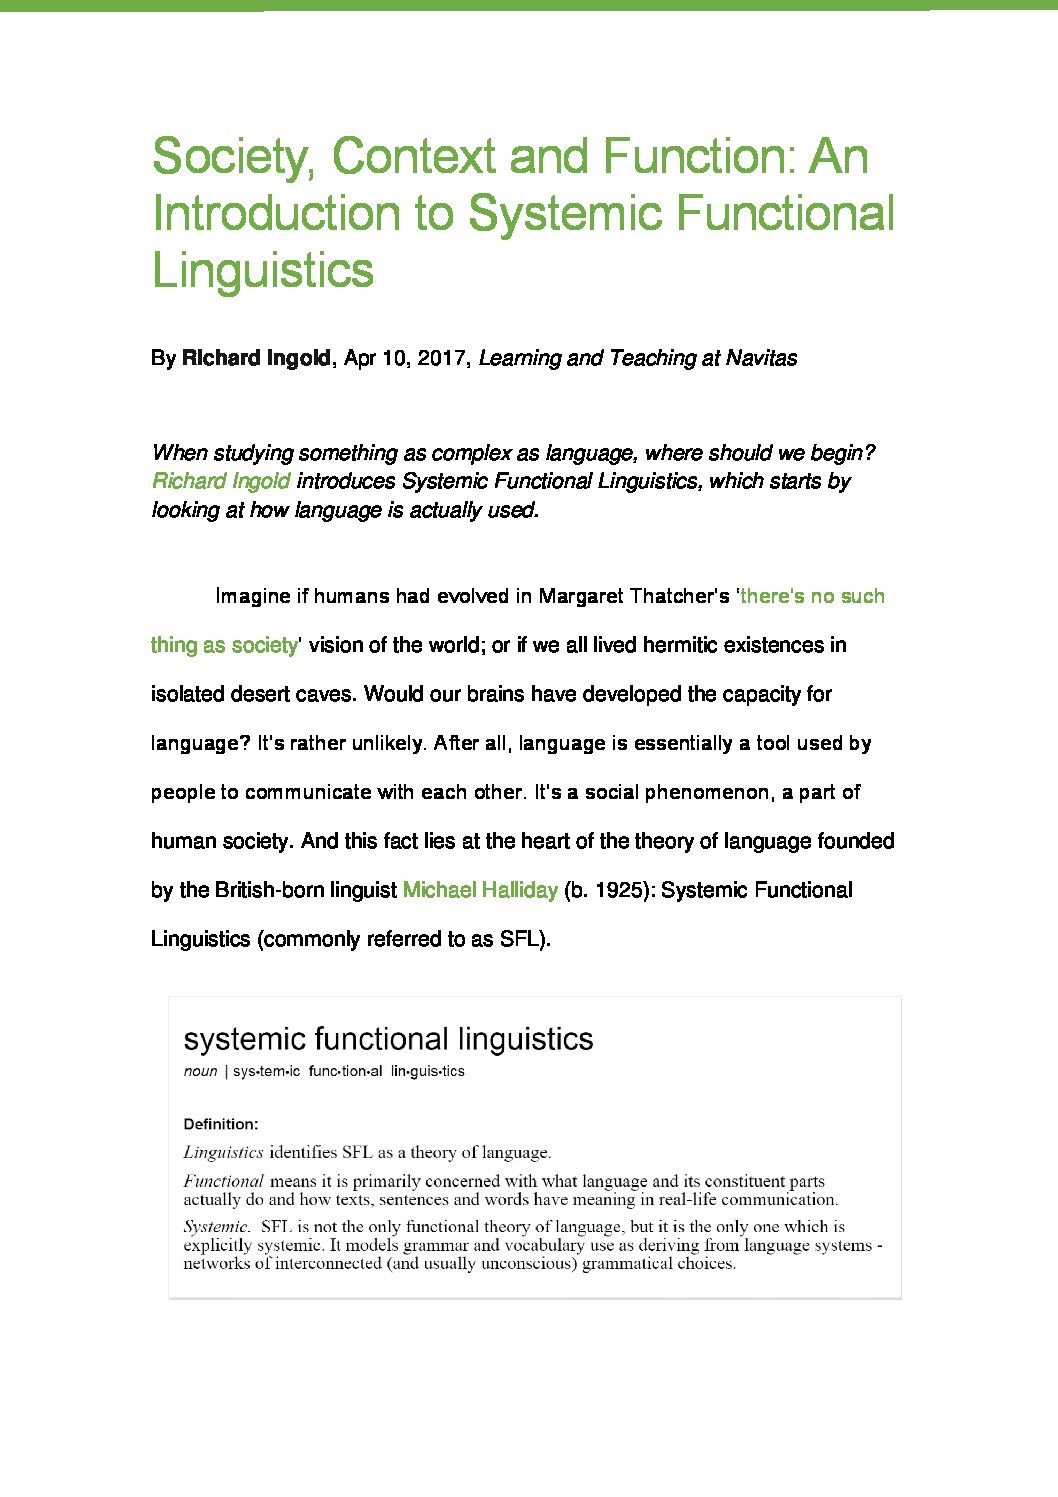 Society, Context and Function An Introduction to Systemic Functional Linguistics Richard Ingold